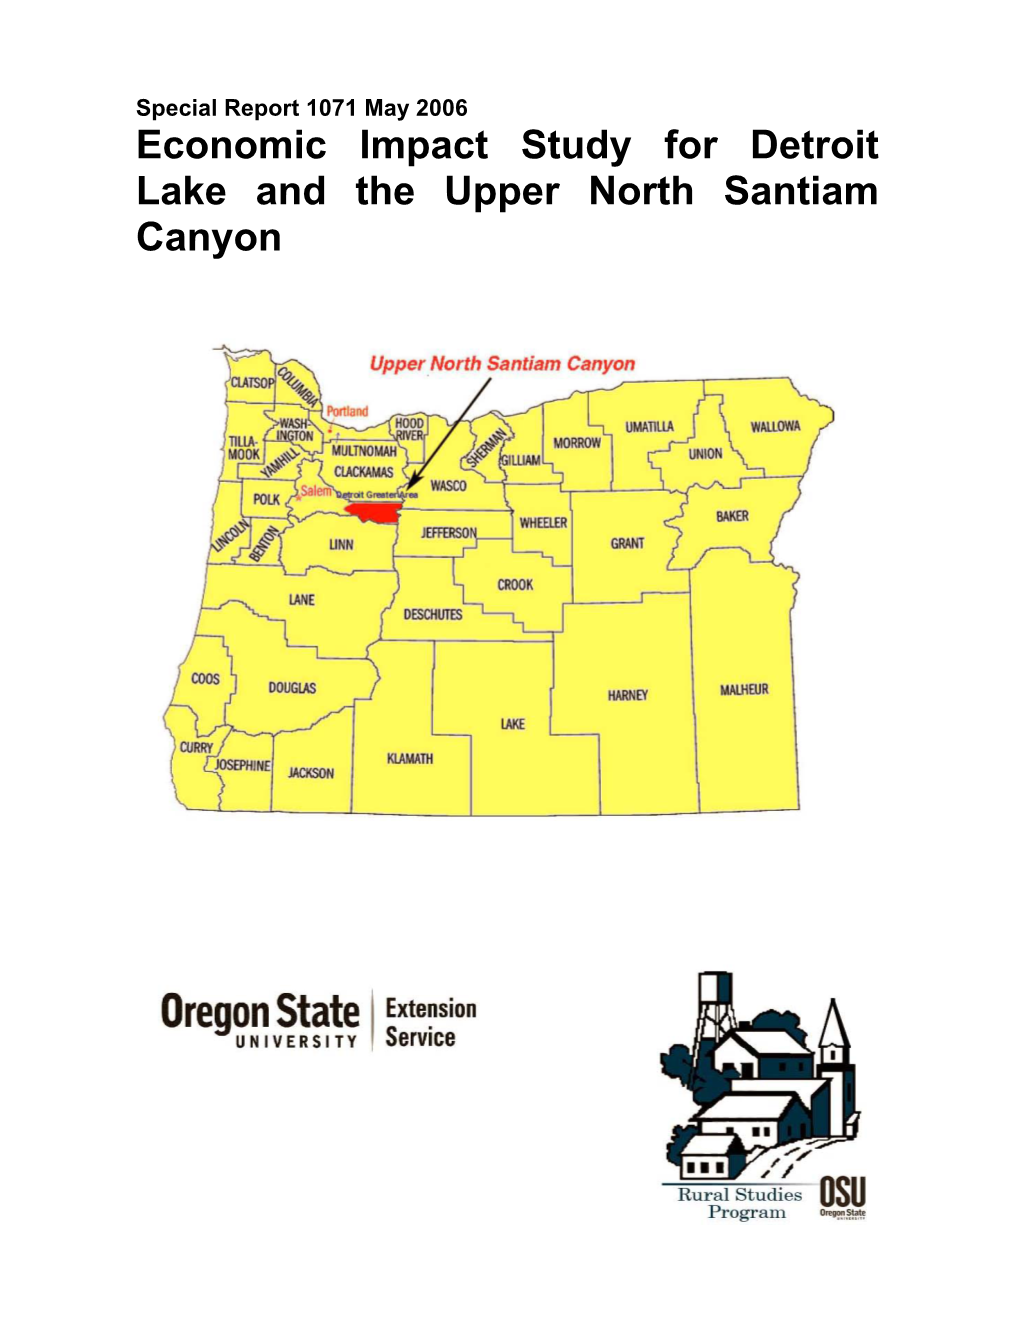 Economic Impact Study for Detroit Lake and the Upper North Santiam Canyon